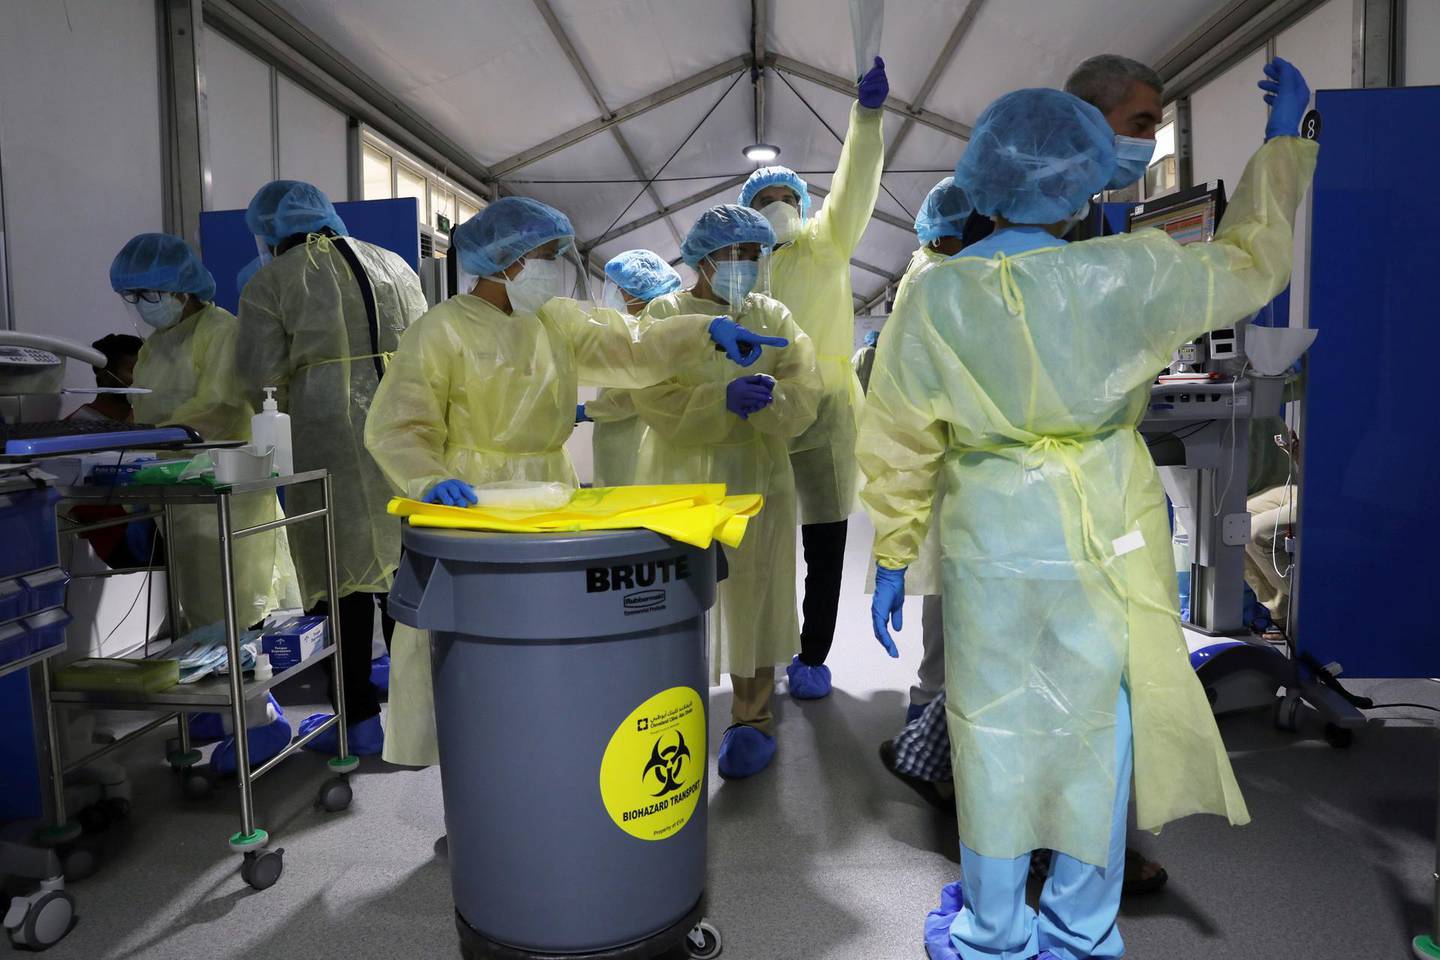 Members of medical staff wearing protective equipment work during testing, amid the coronavirus disease (COVID-19) outbreak, at the Cleveland Clinic hospital in Abu Dhabi, United Arab Emirates, April 20, 2020. Picture taken April 20, 2020. REUTERS/Christopher Pike